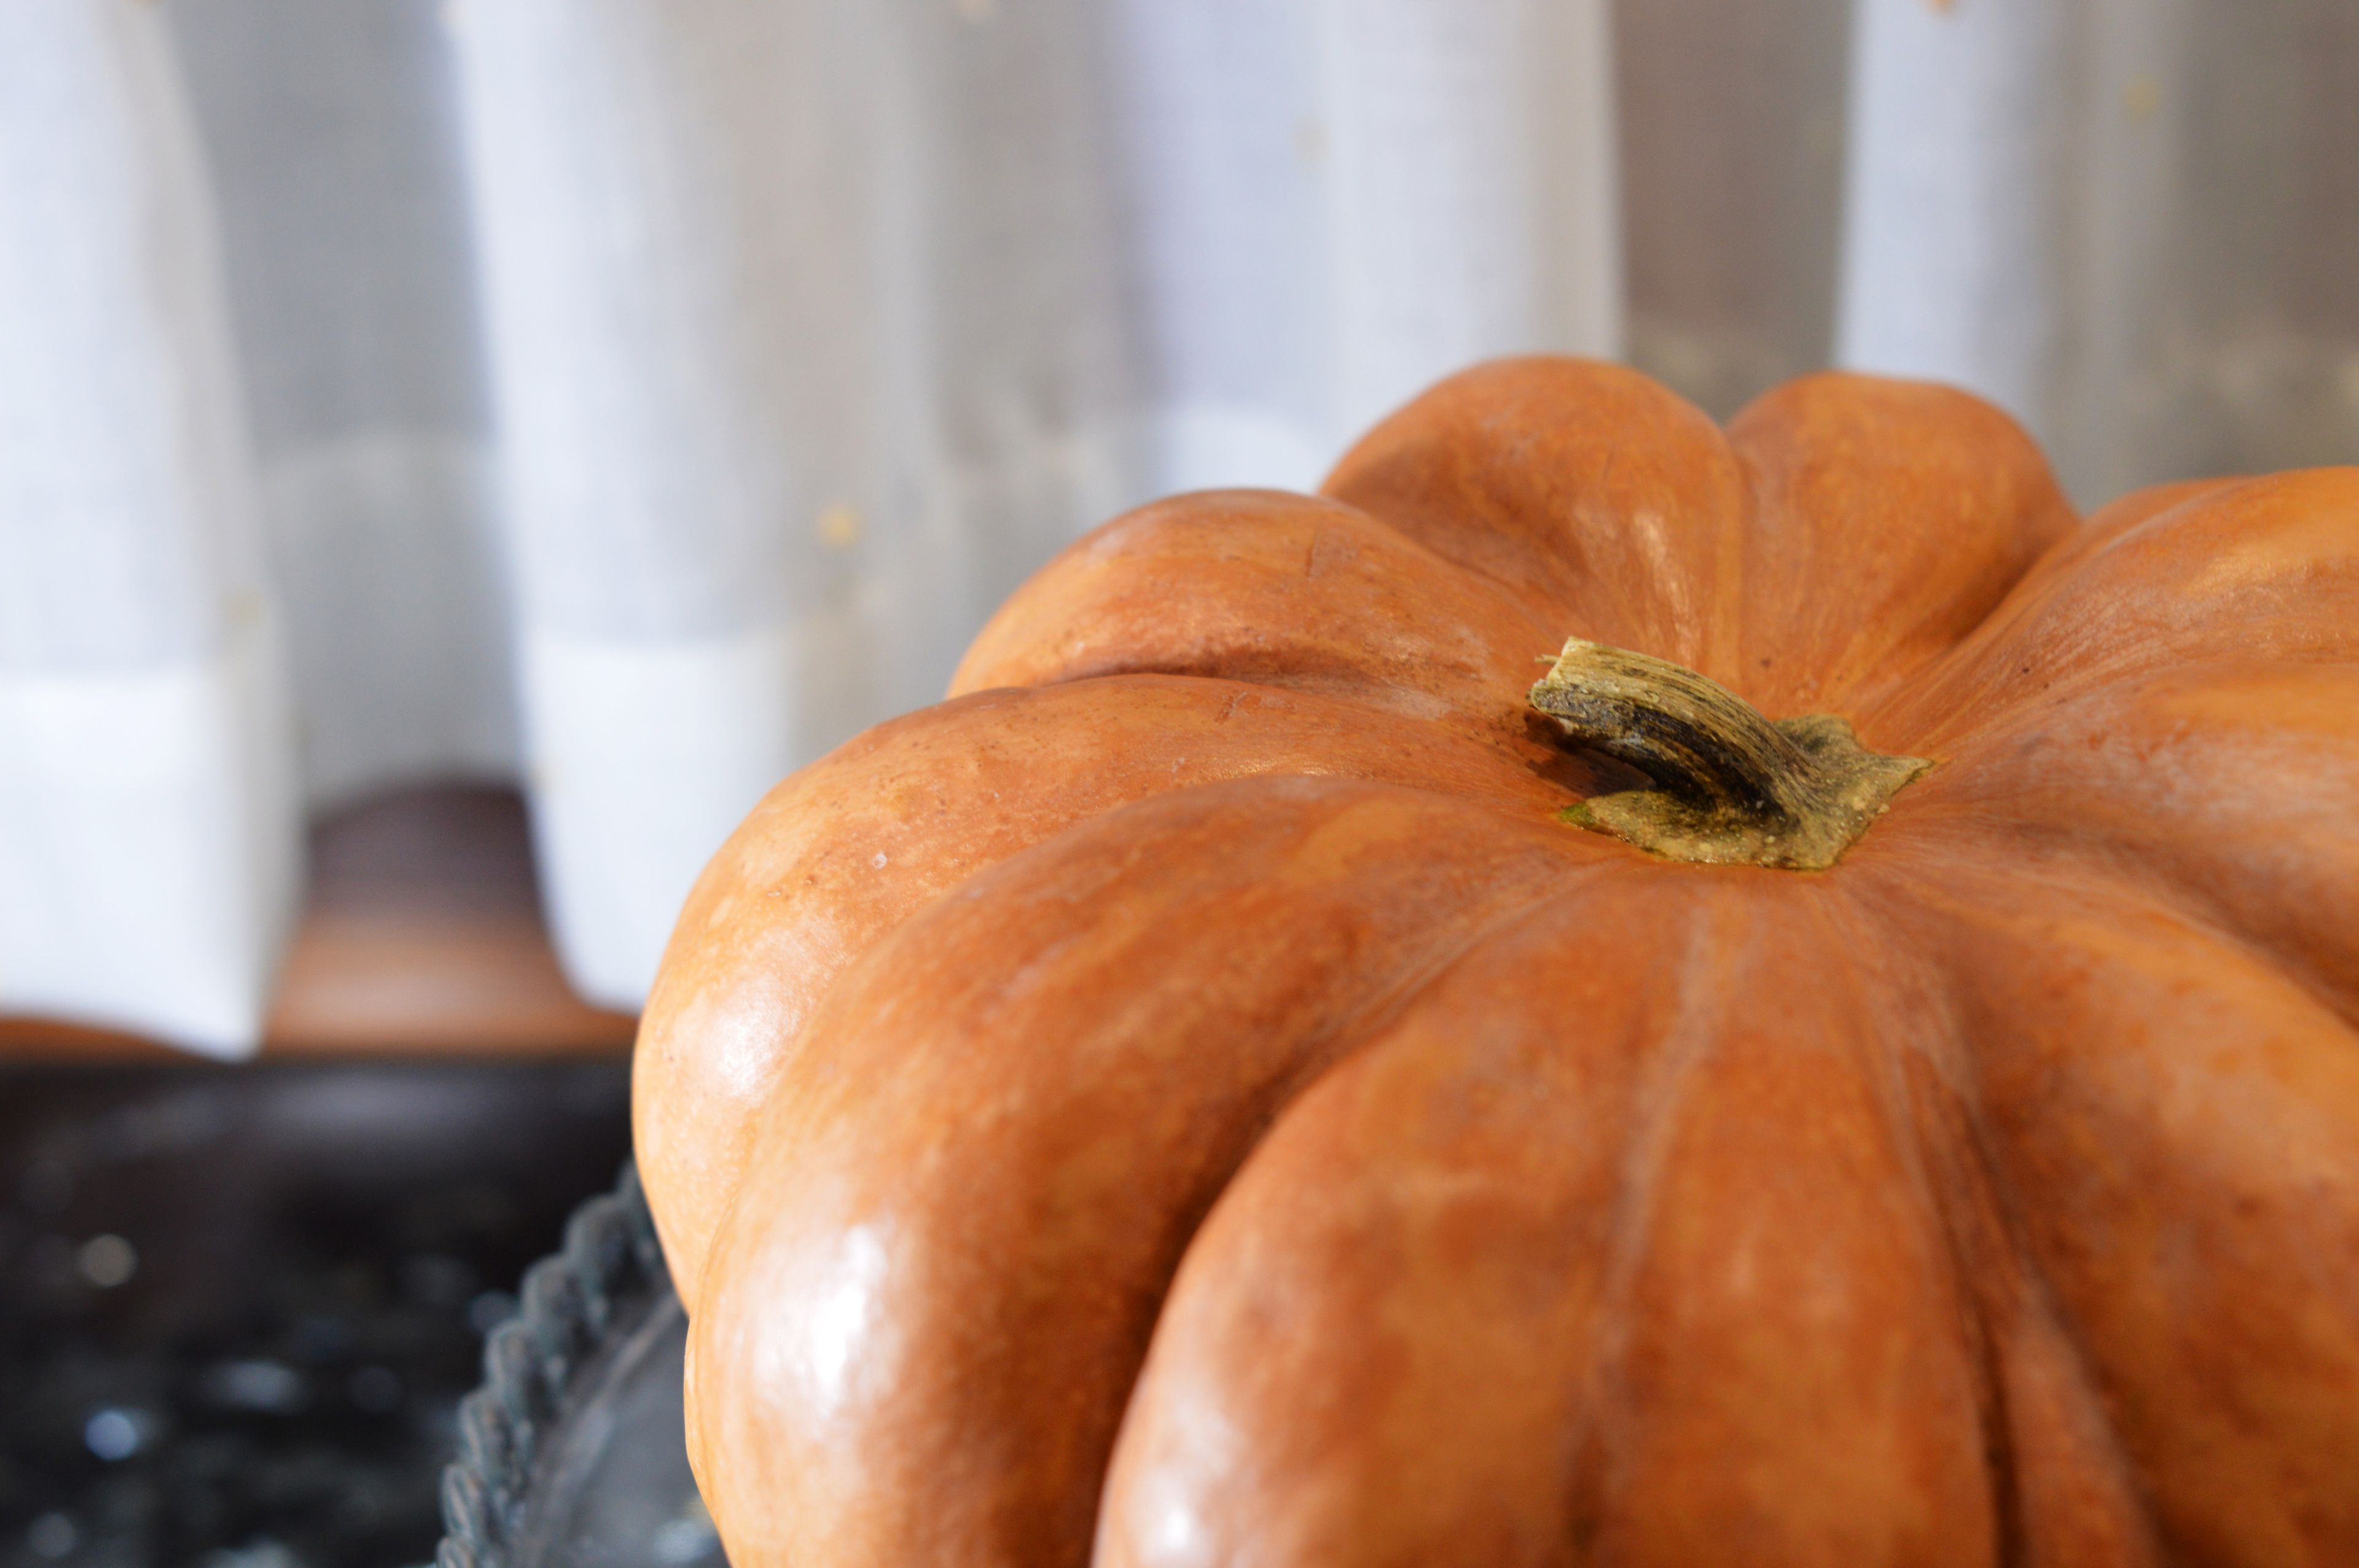 Grease a pan with butter and turn the oven on 180 degrees. Cut the pumpkin and cut 300 grams into small cubes.